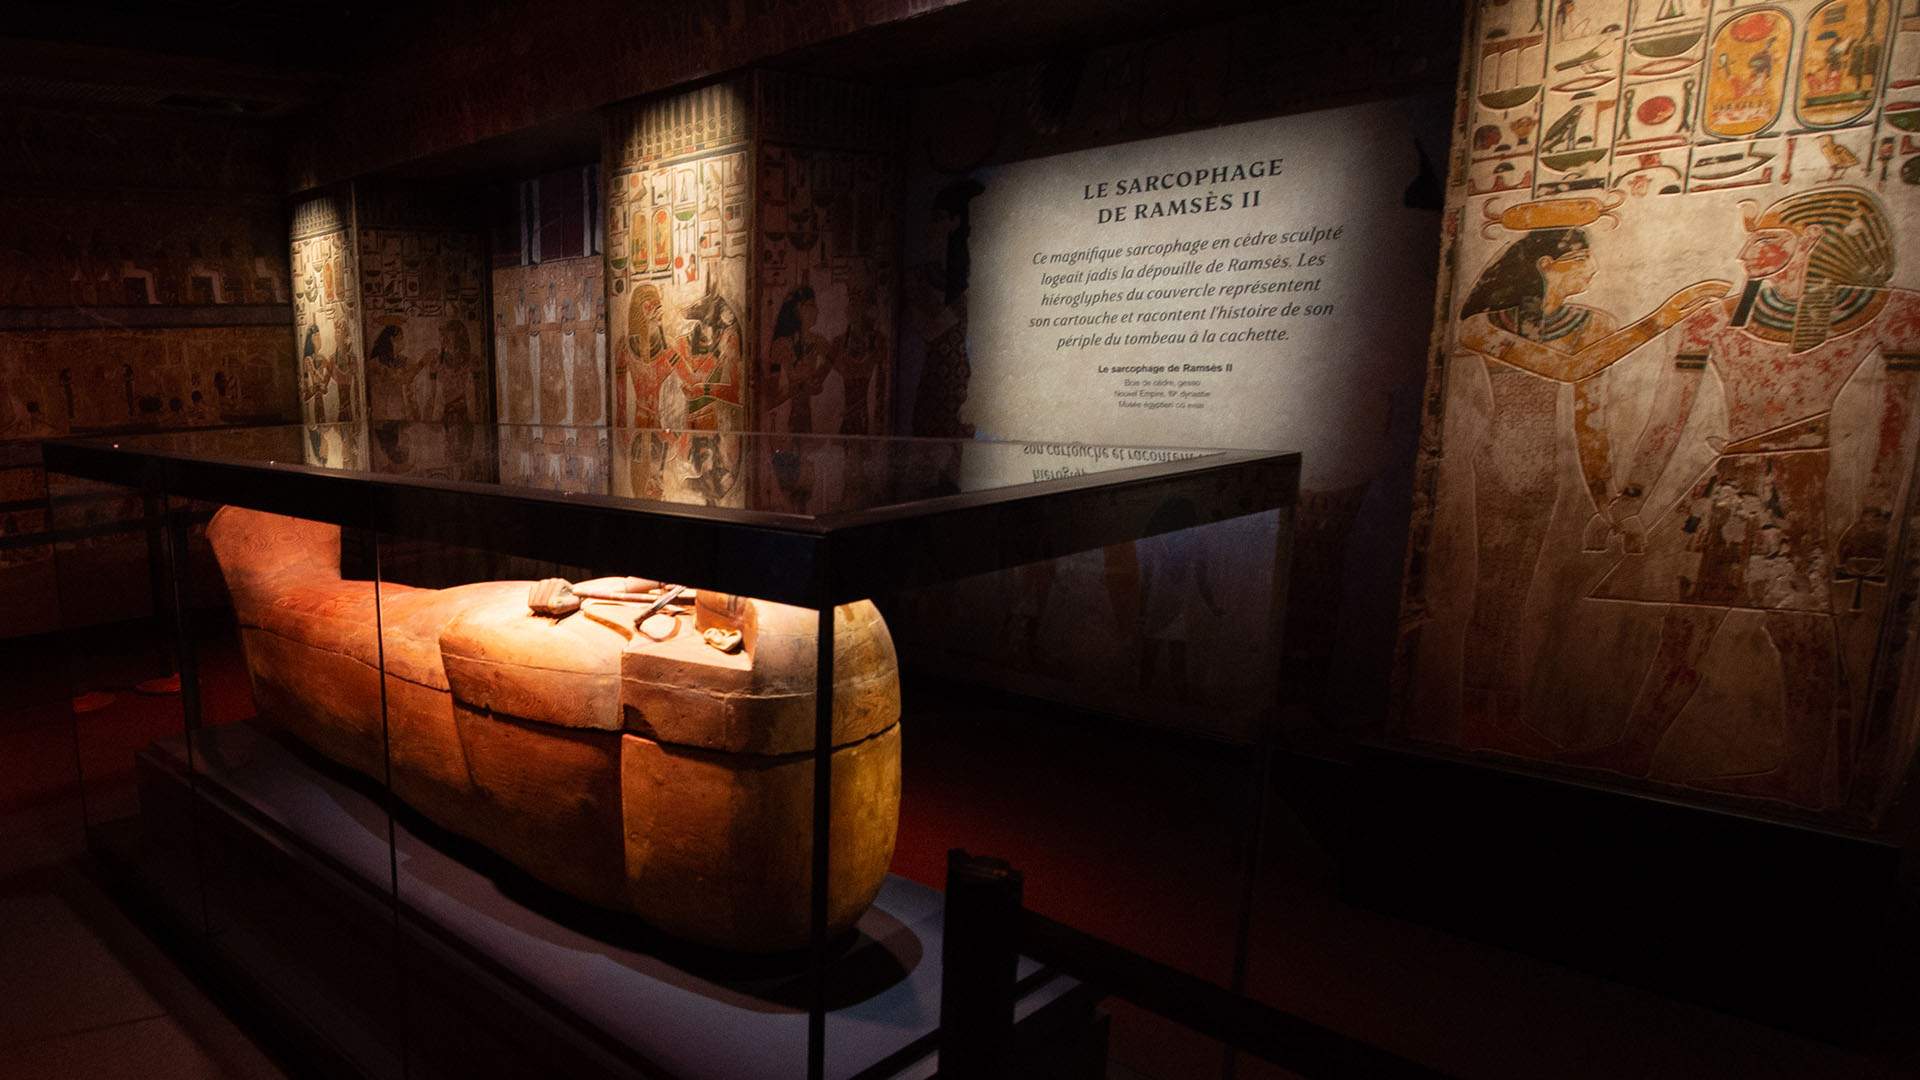 Sydney's Huge 'Ramses & the Gold of the Pharaohs' Exhibition Will Feature the Sarcophagus of Ramses II